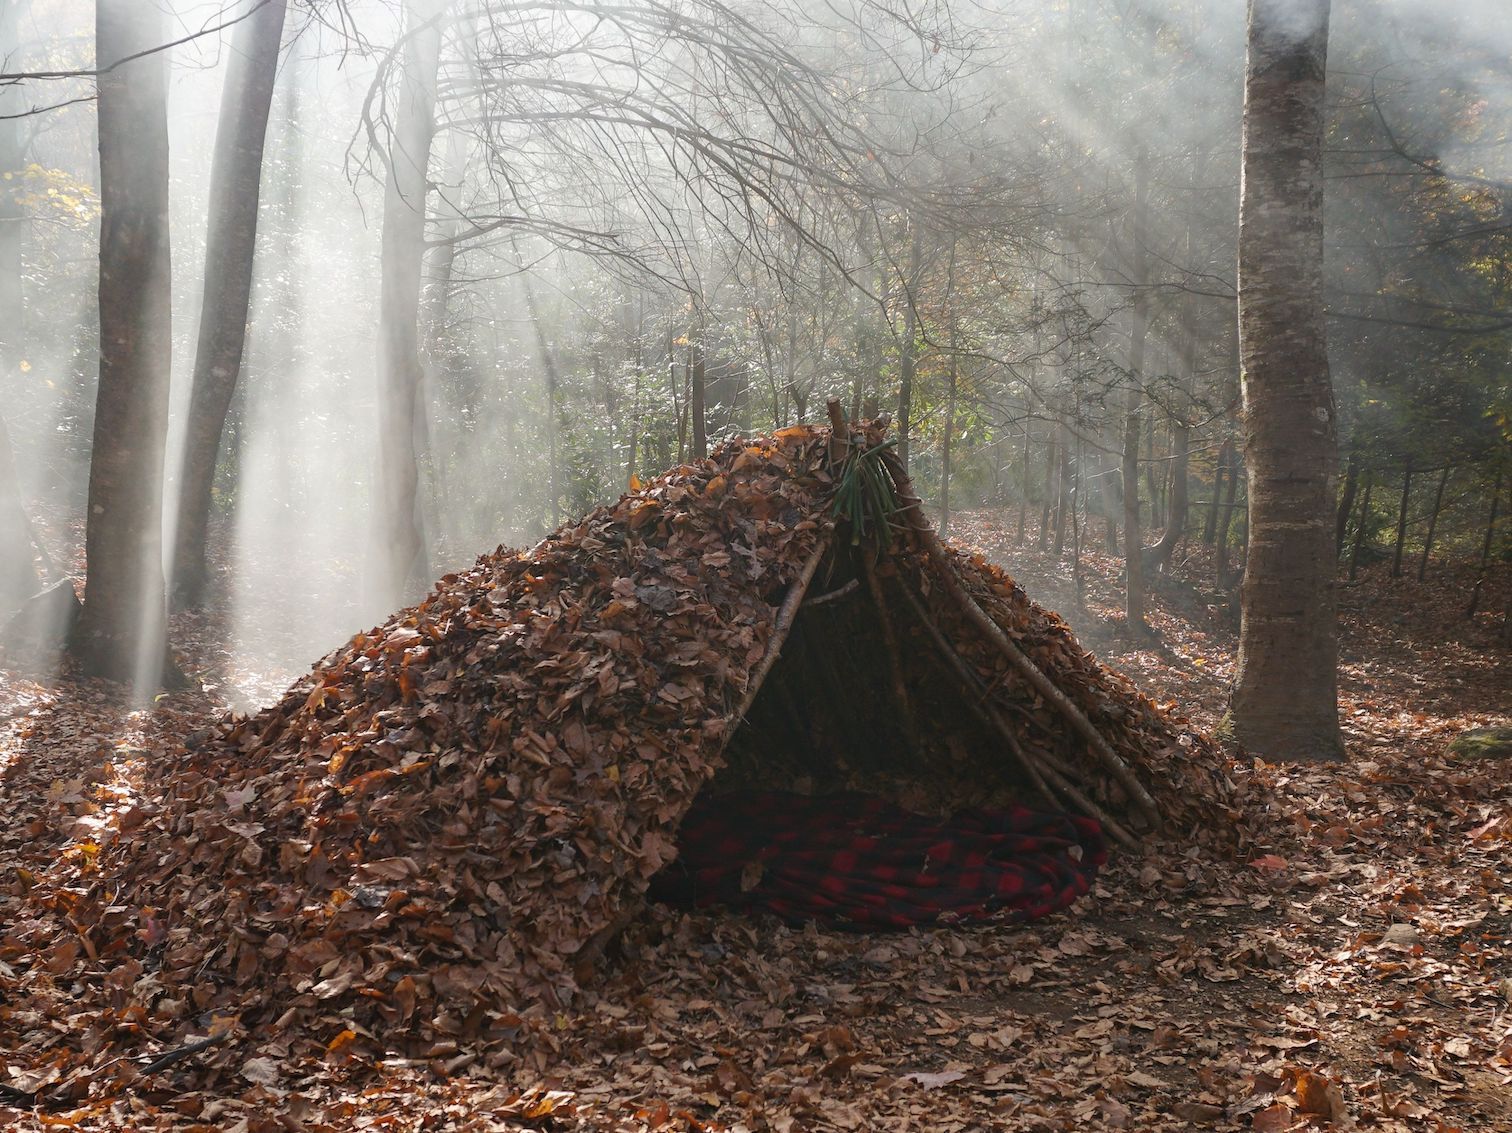 A rustic debris shelter made waterproof with leaf litter.